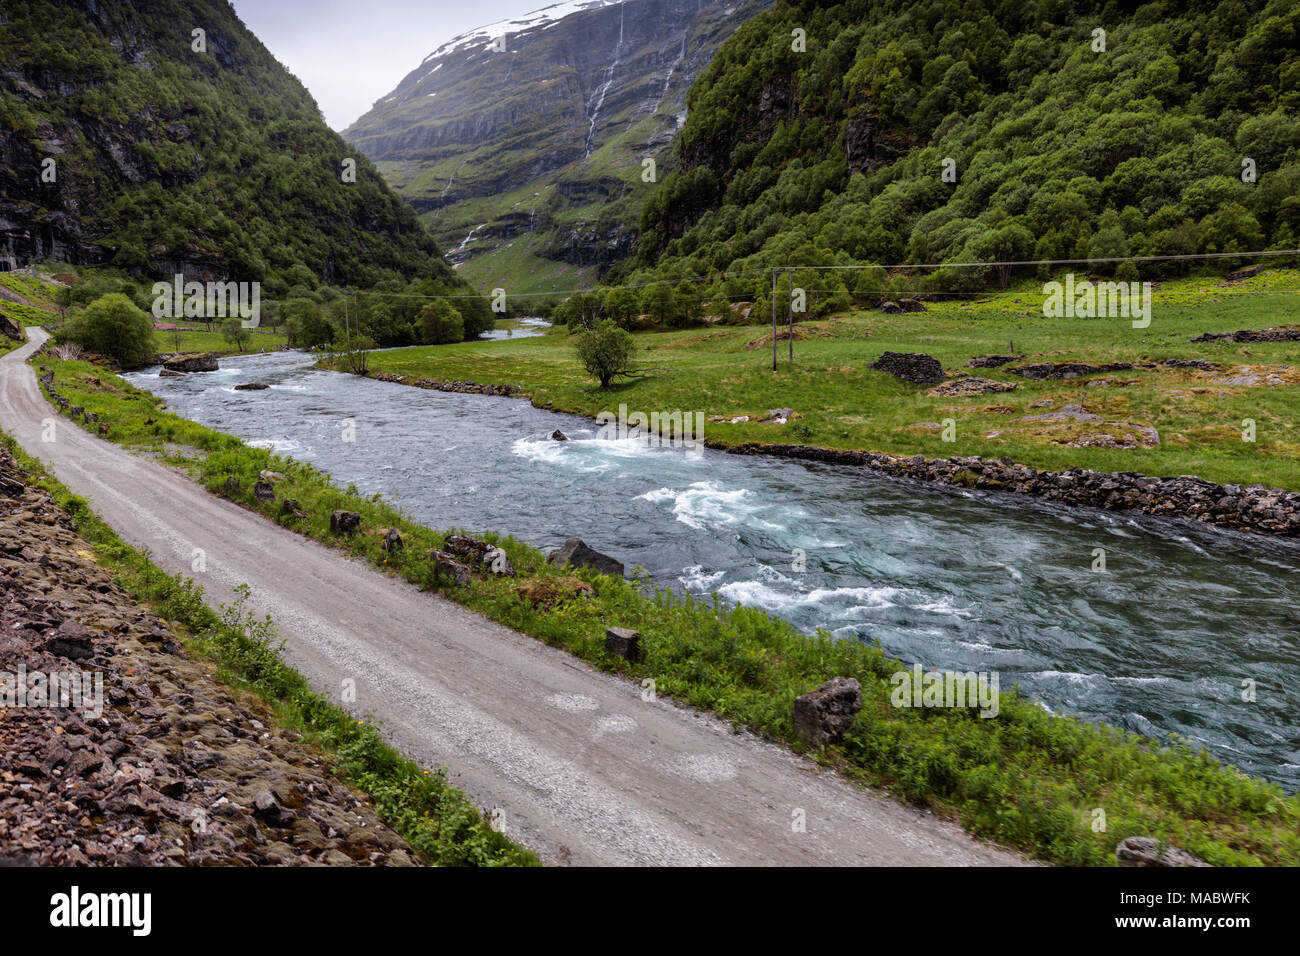 The Flam River in Flam, Norway. Viewed from the Falm Express. Stock Photo